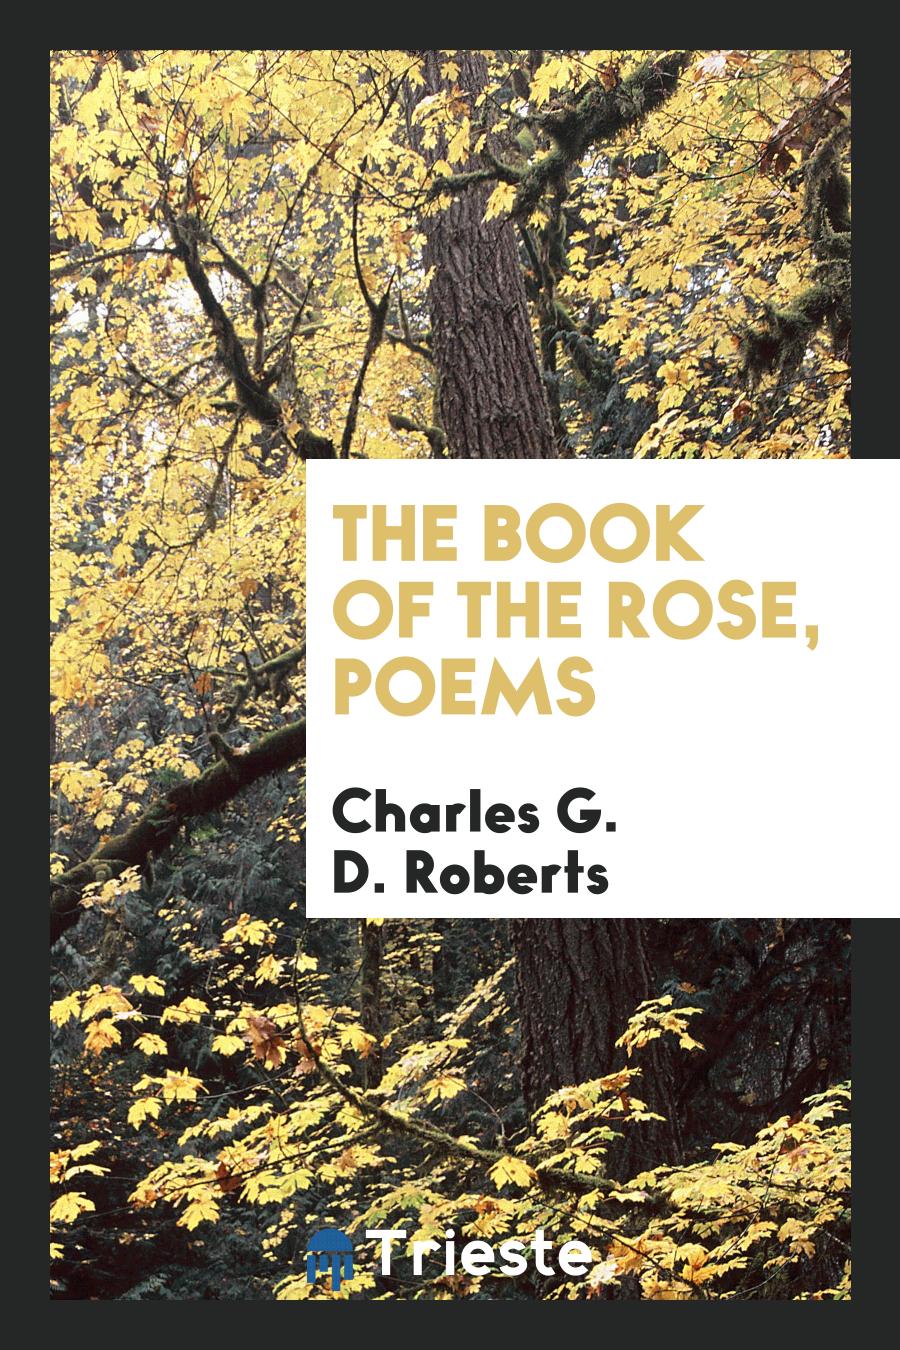 The Book of the Rose, poems